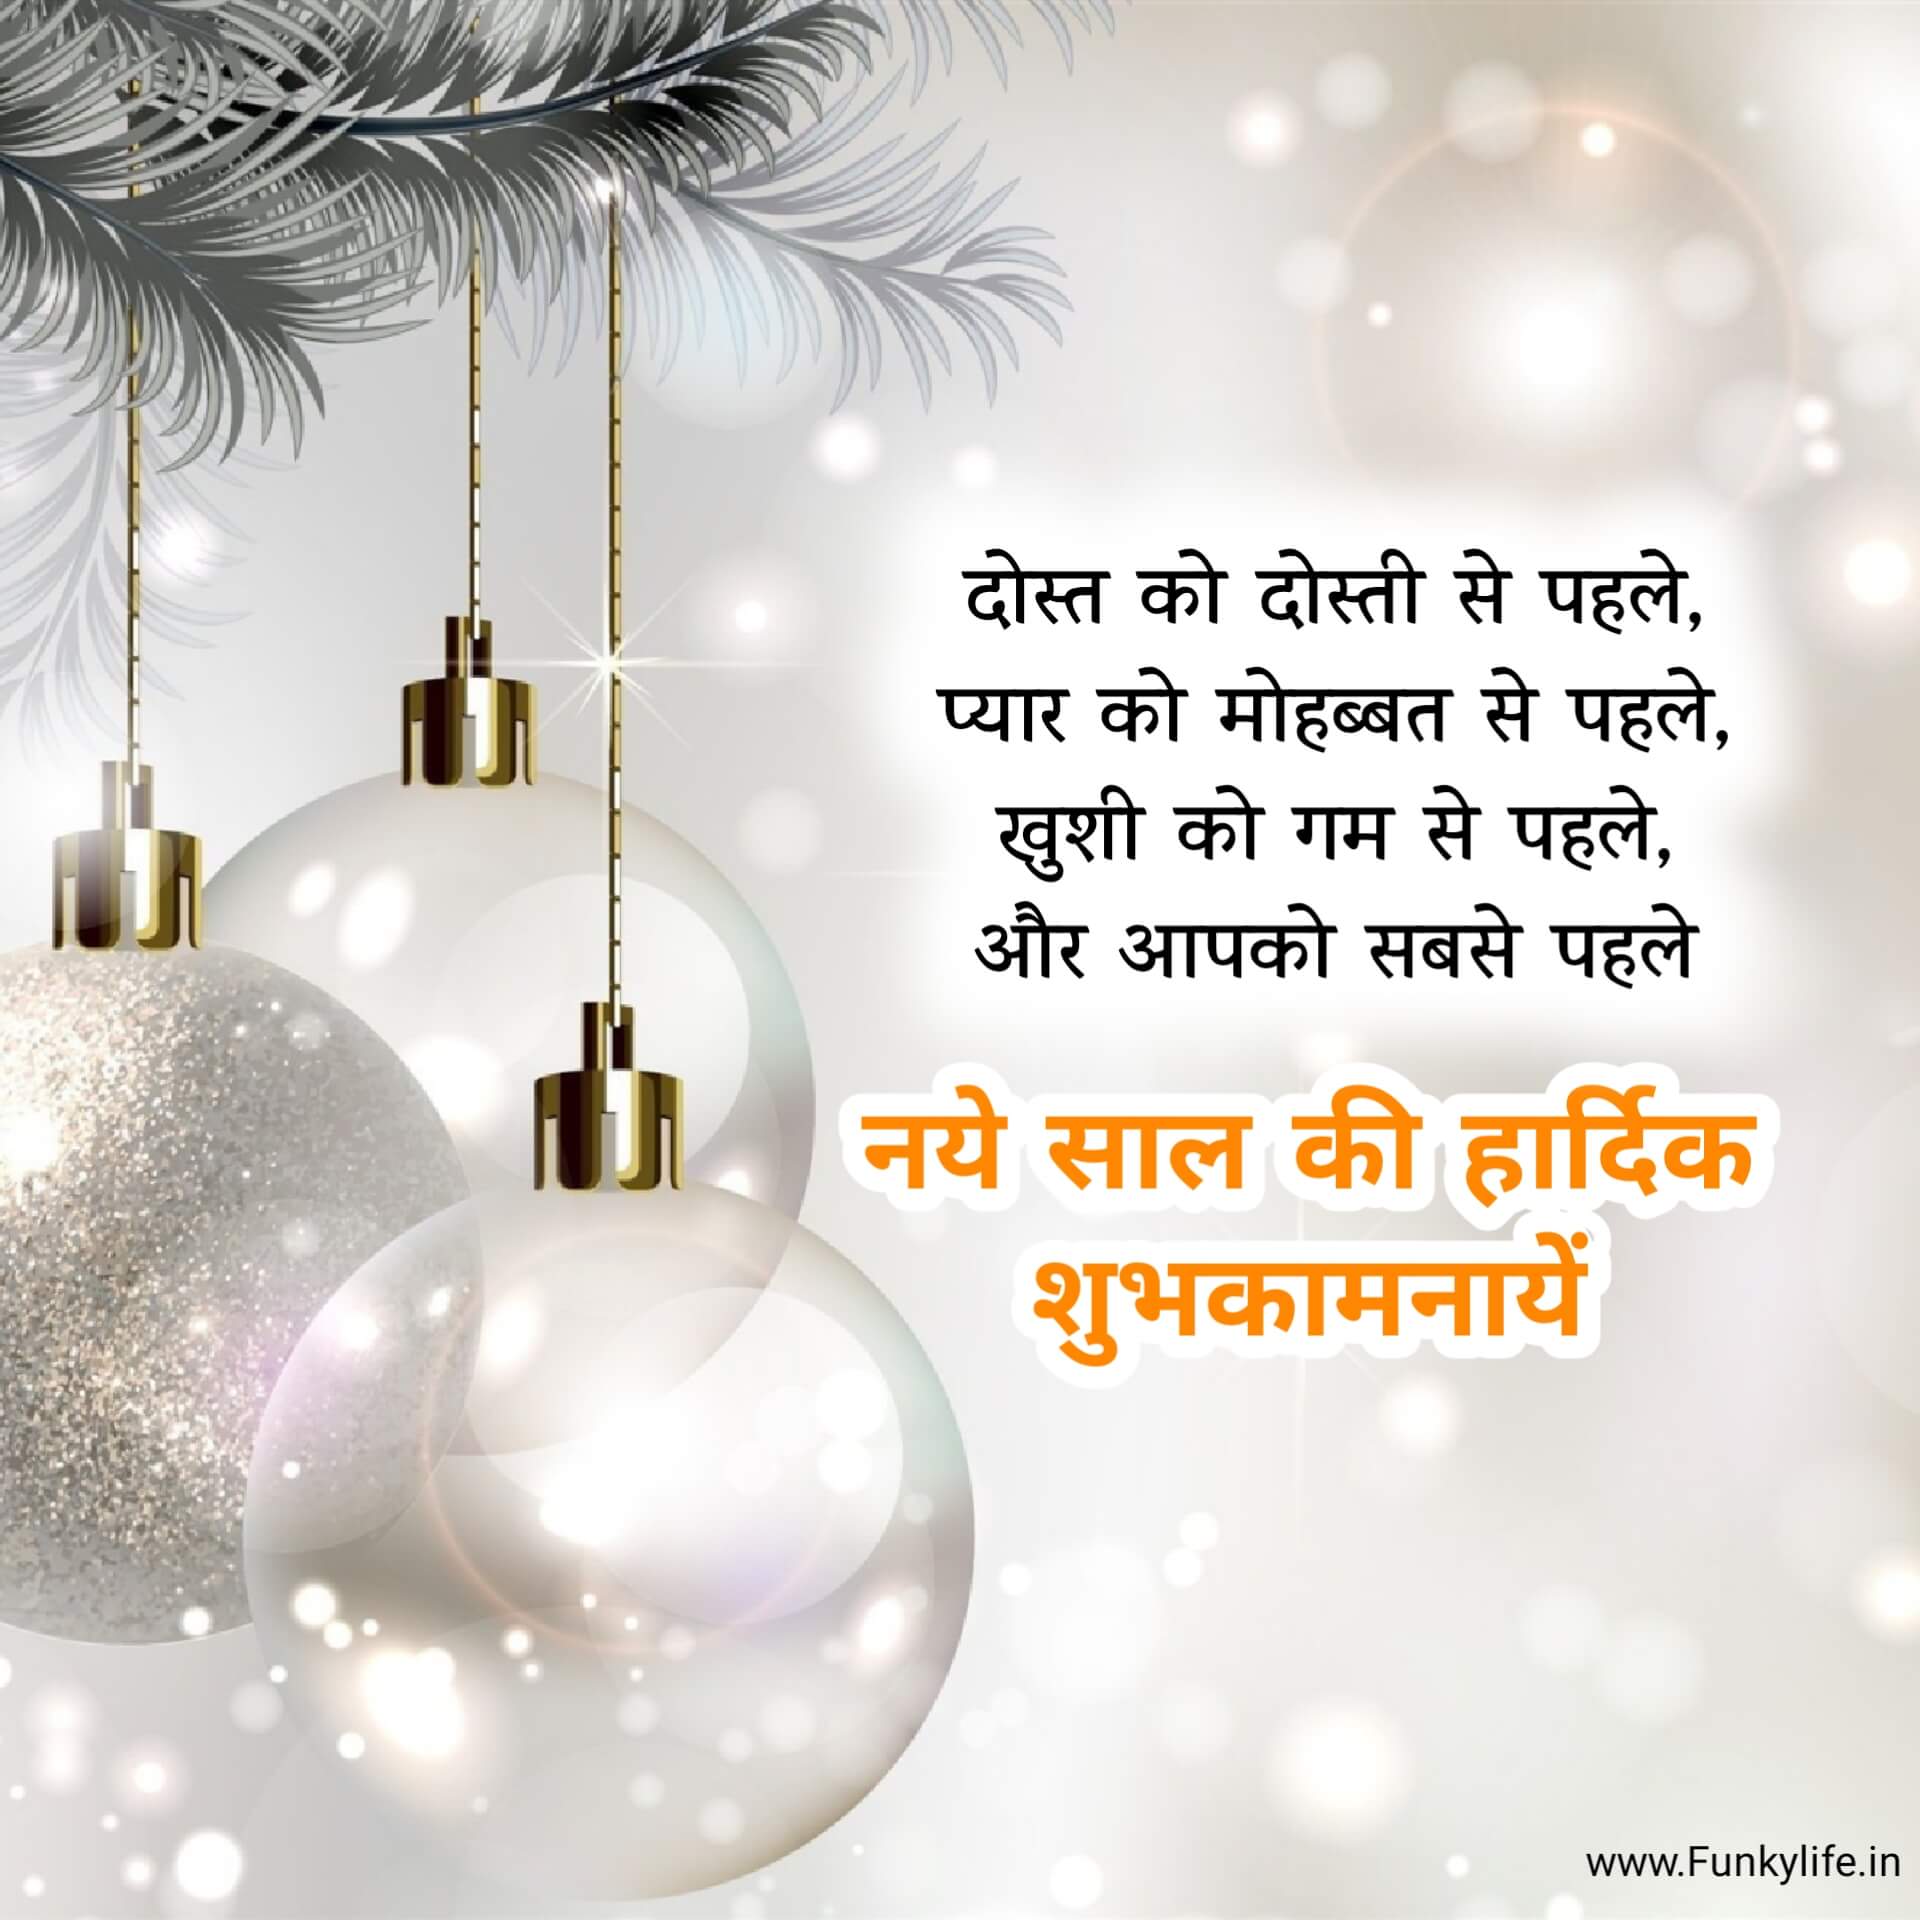 Advance Happy New Year Wishes in Hindi